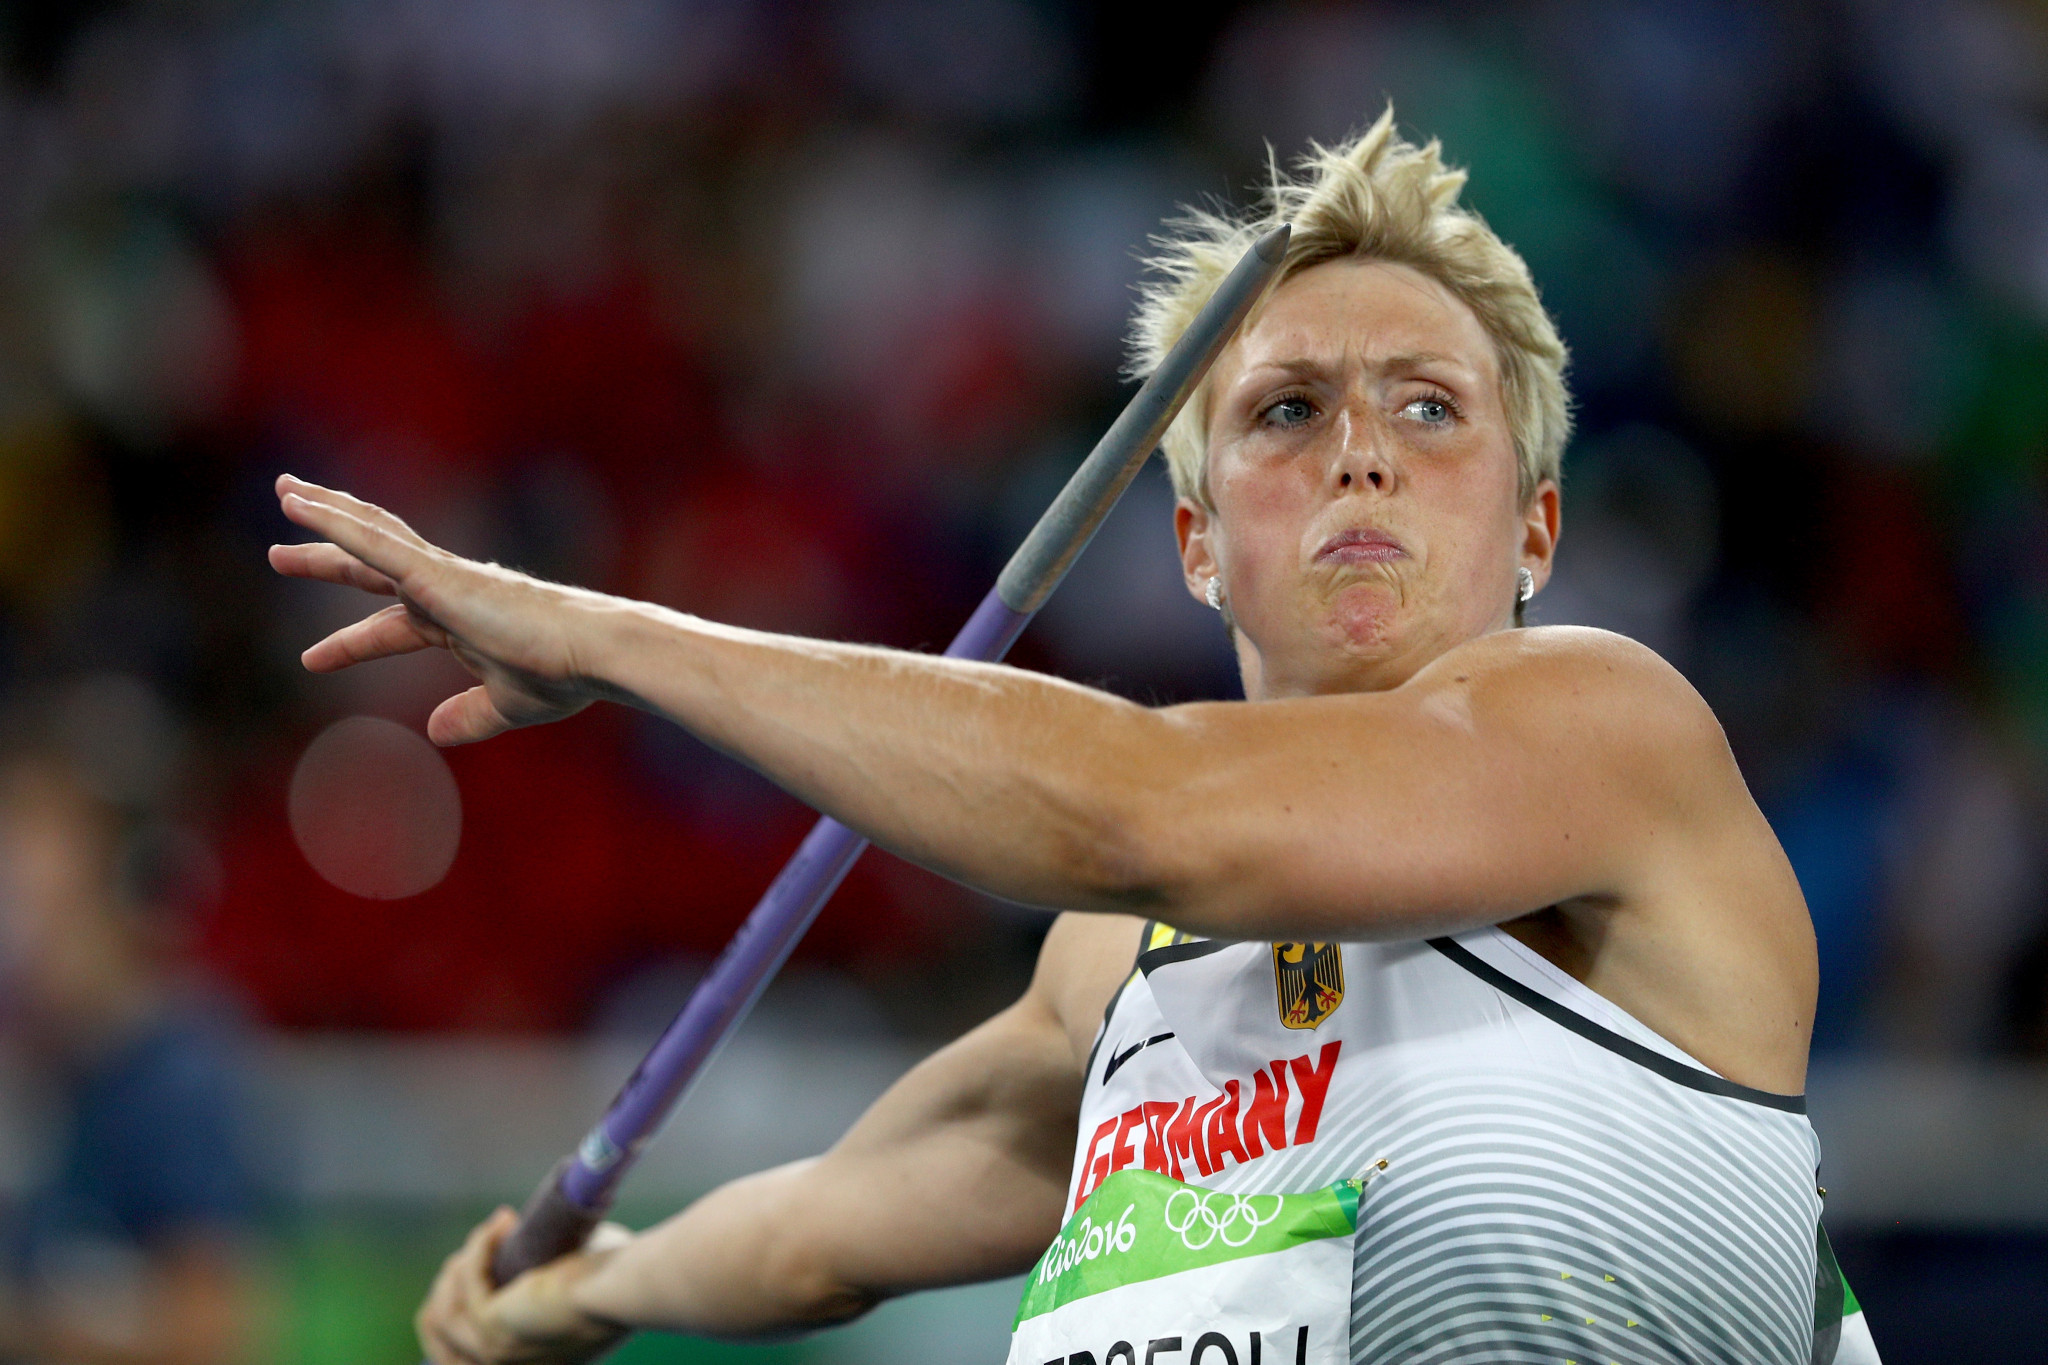 German javelin thrower Christina Obergföll has received her silver medal ©Getty Images